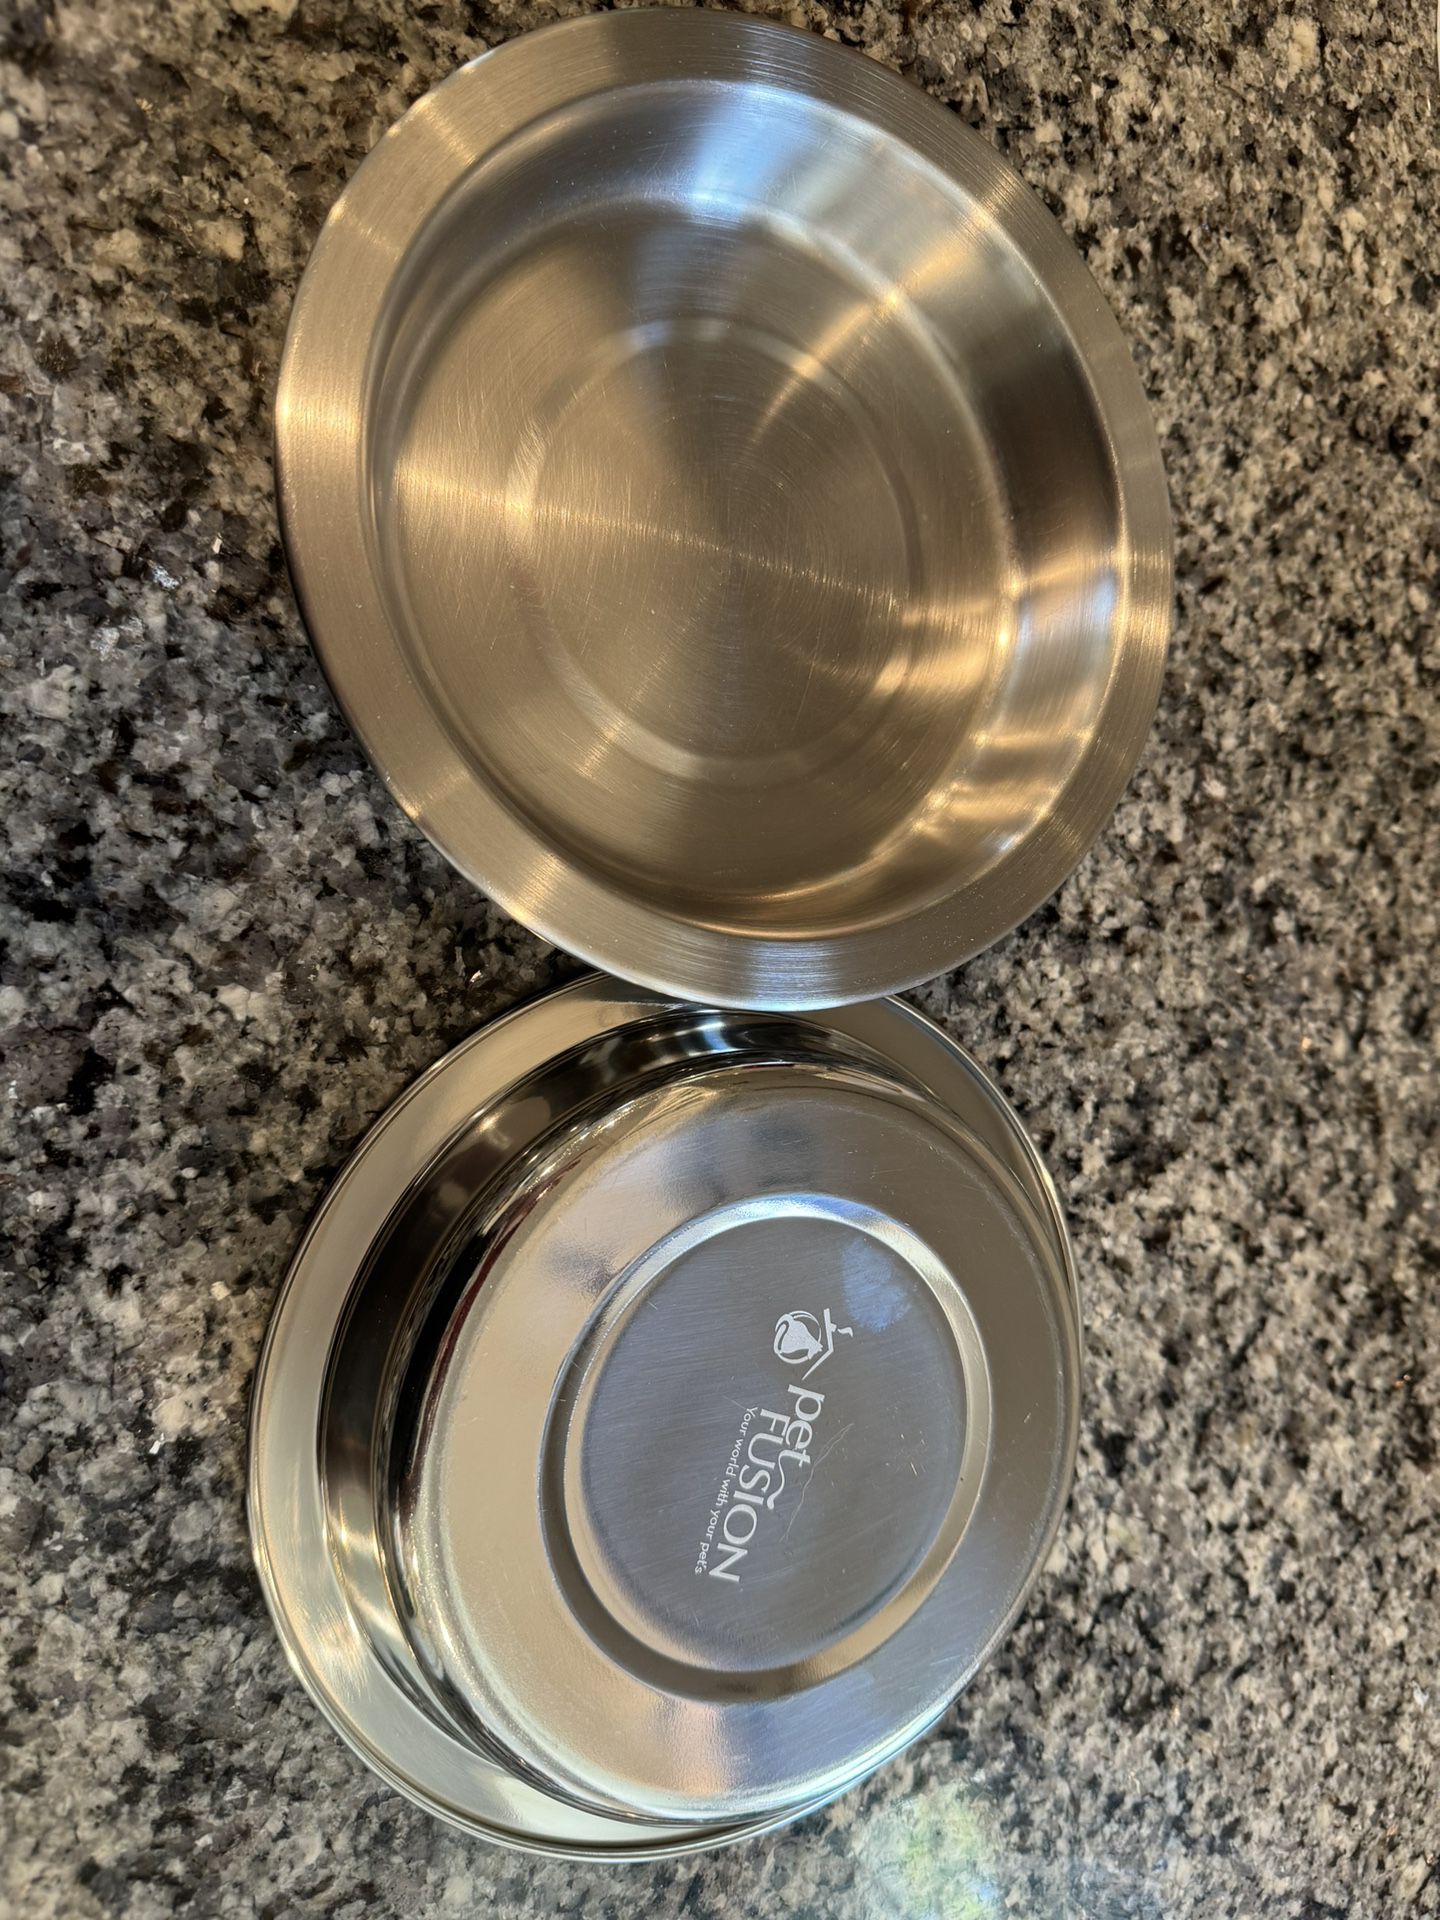 13oz stainless steel pet dishes